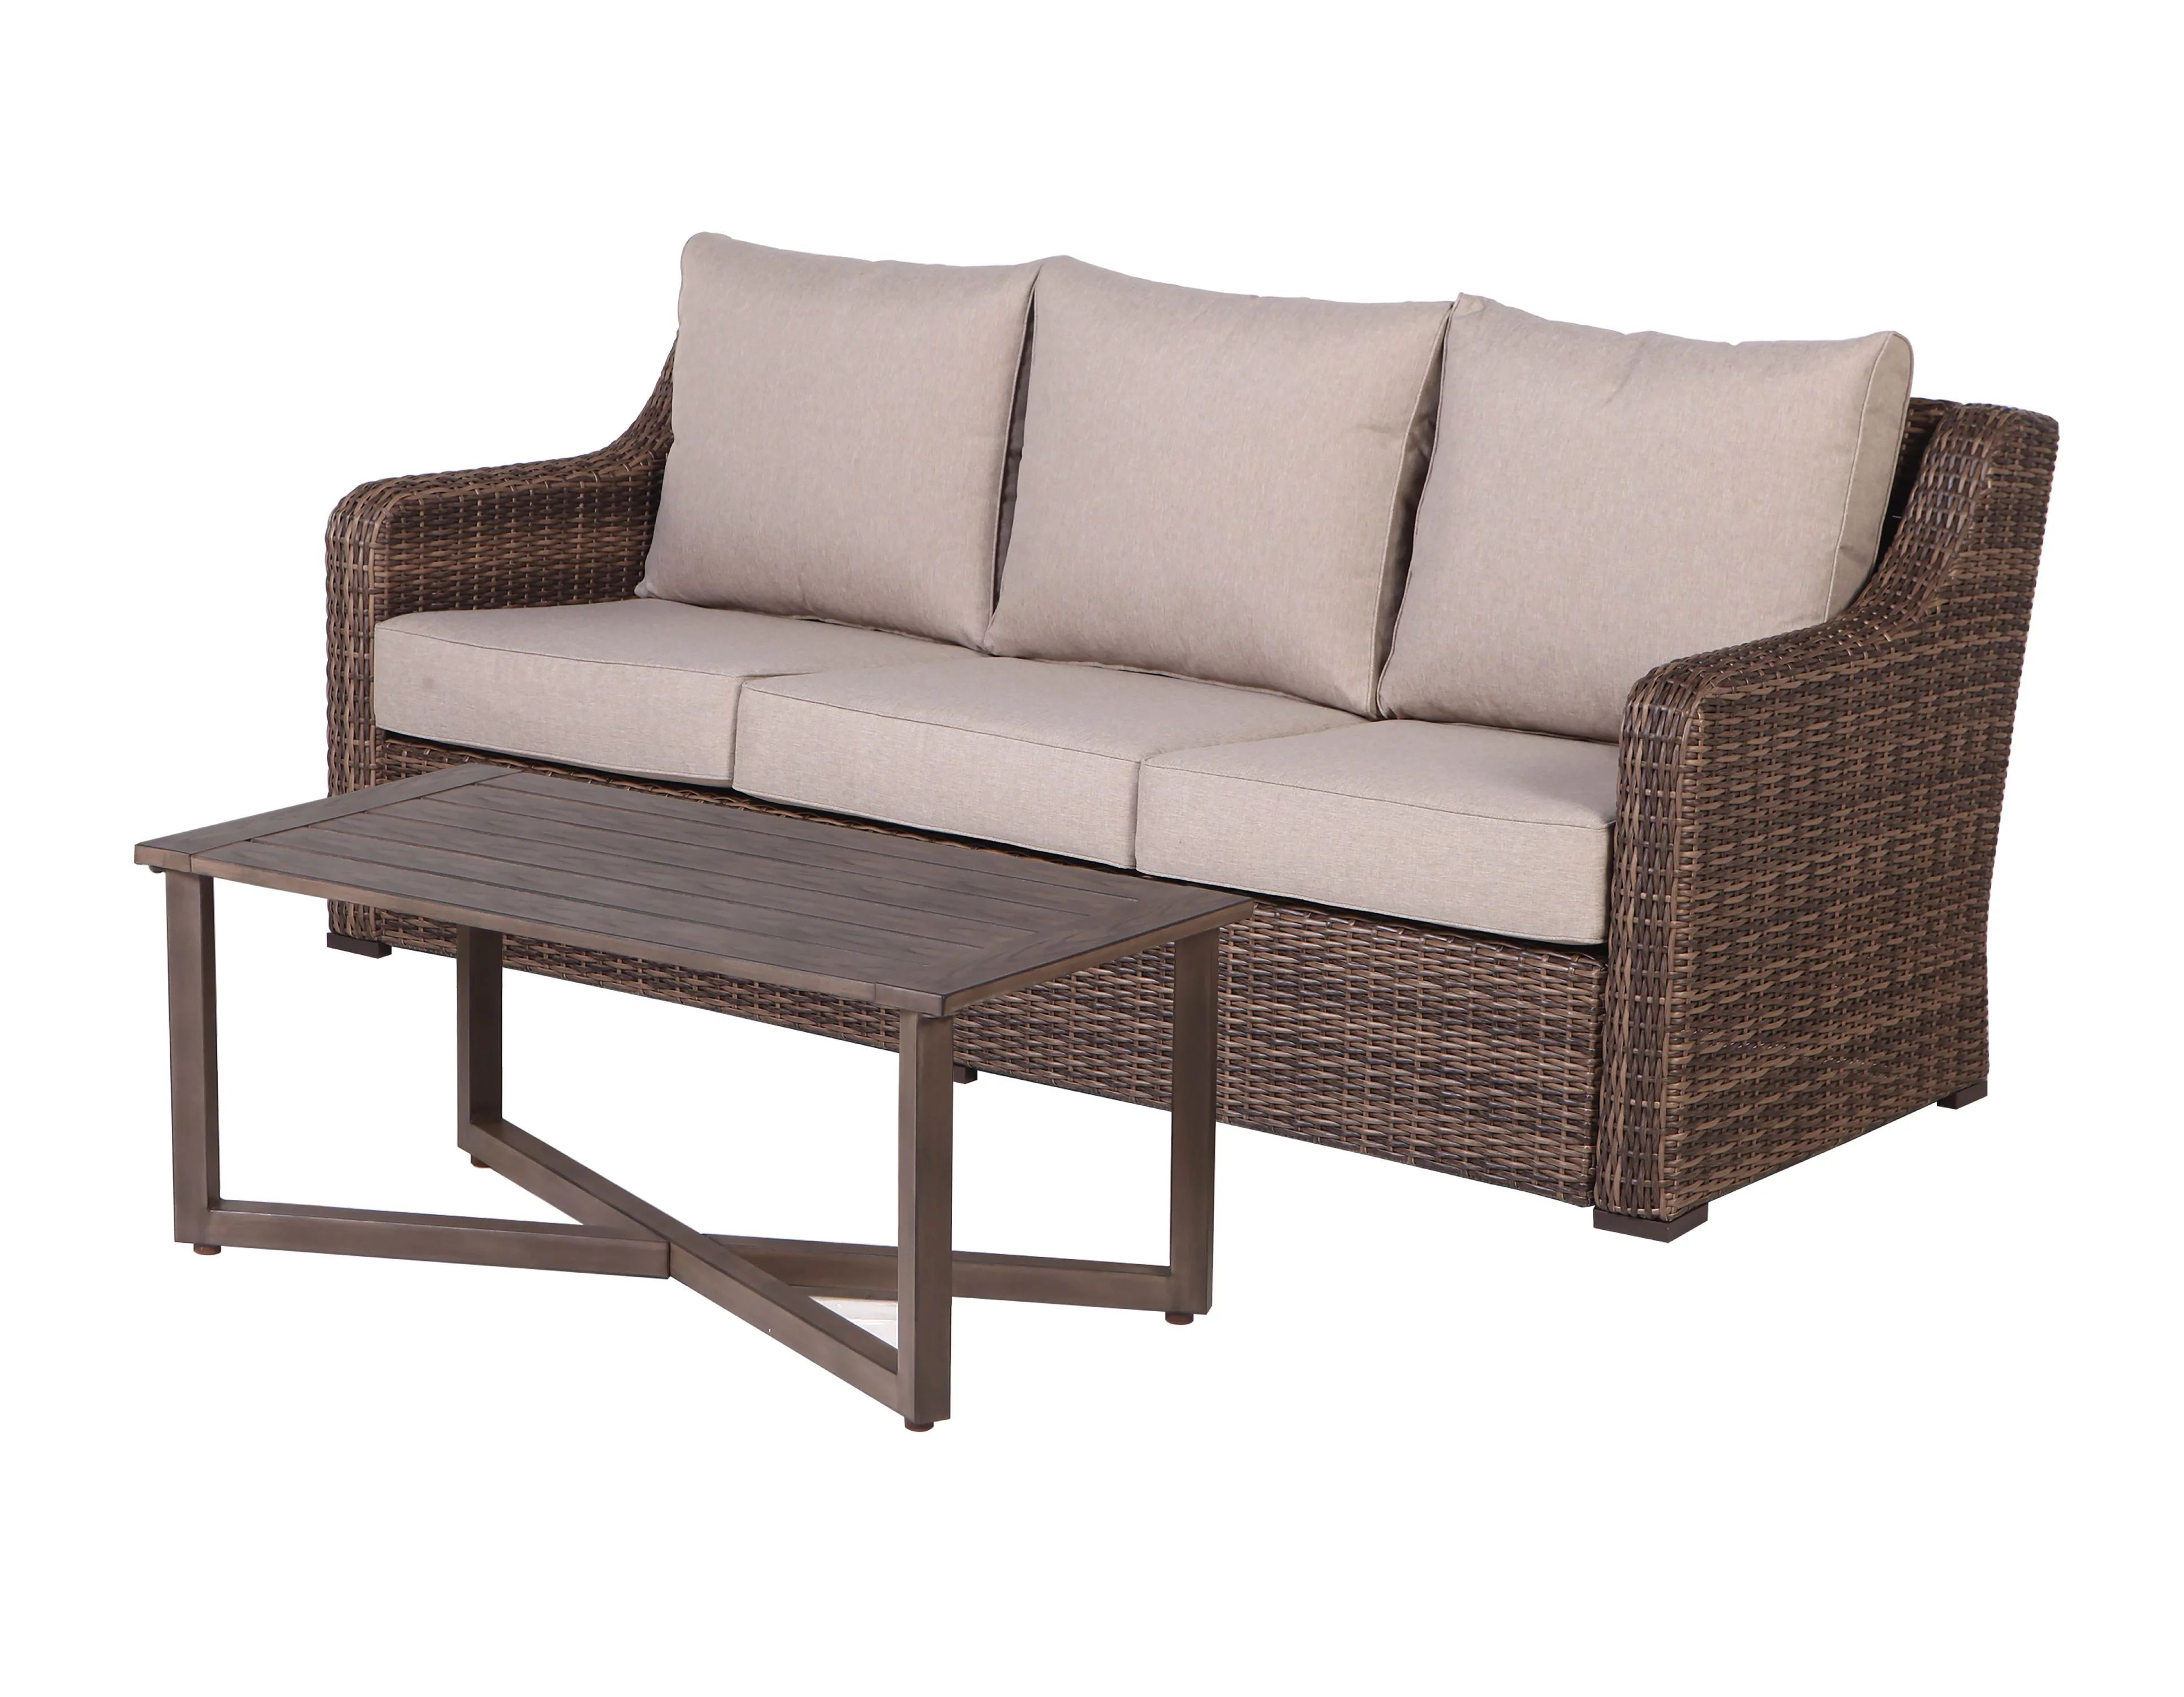 Better Homes & Gardens Hawthorne Park Sofa and Coffee Table with Beige Cushions | Walmart (US)